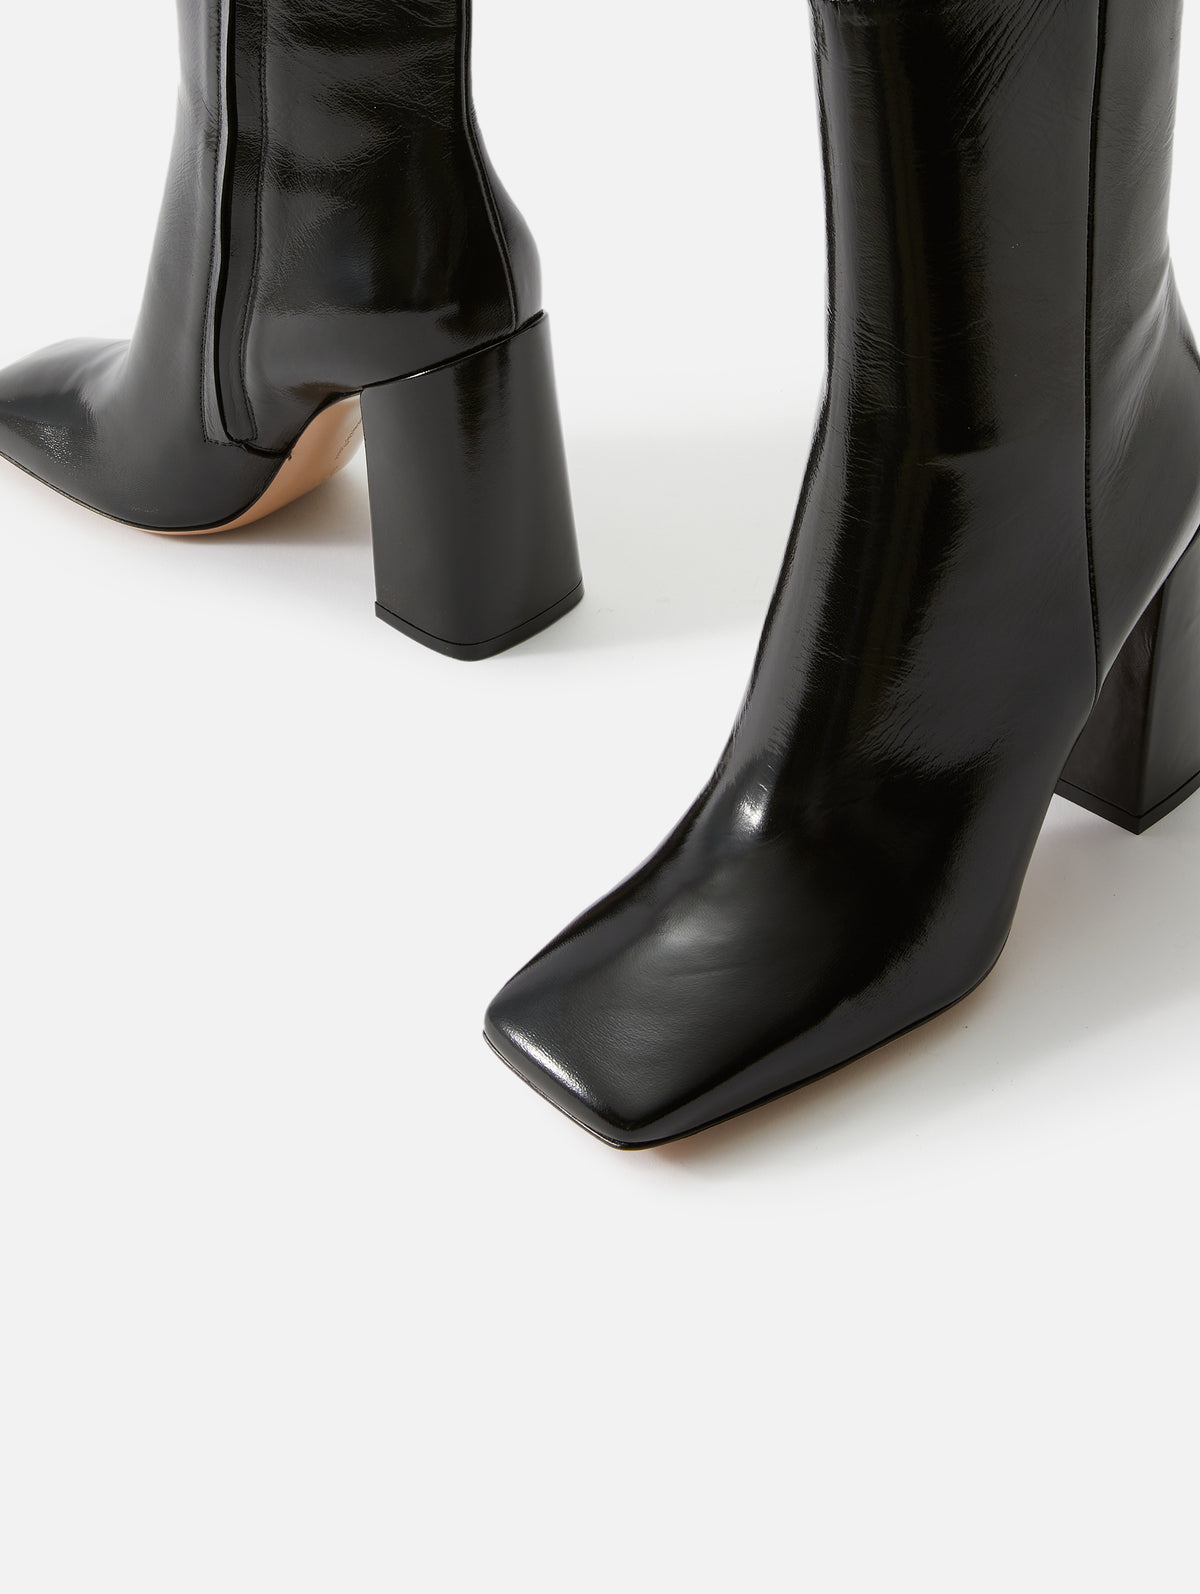 view 2 - Nuit Square Toe Bootie